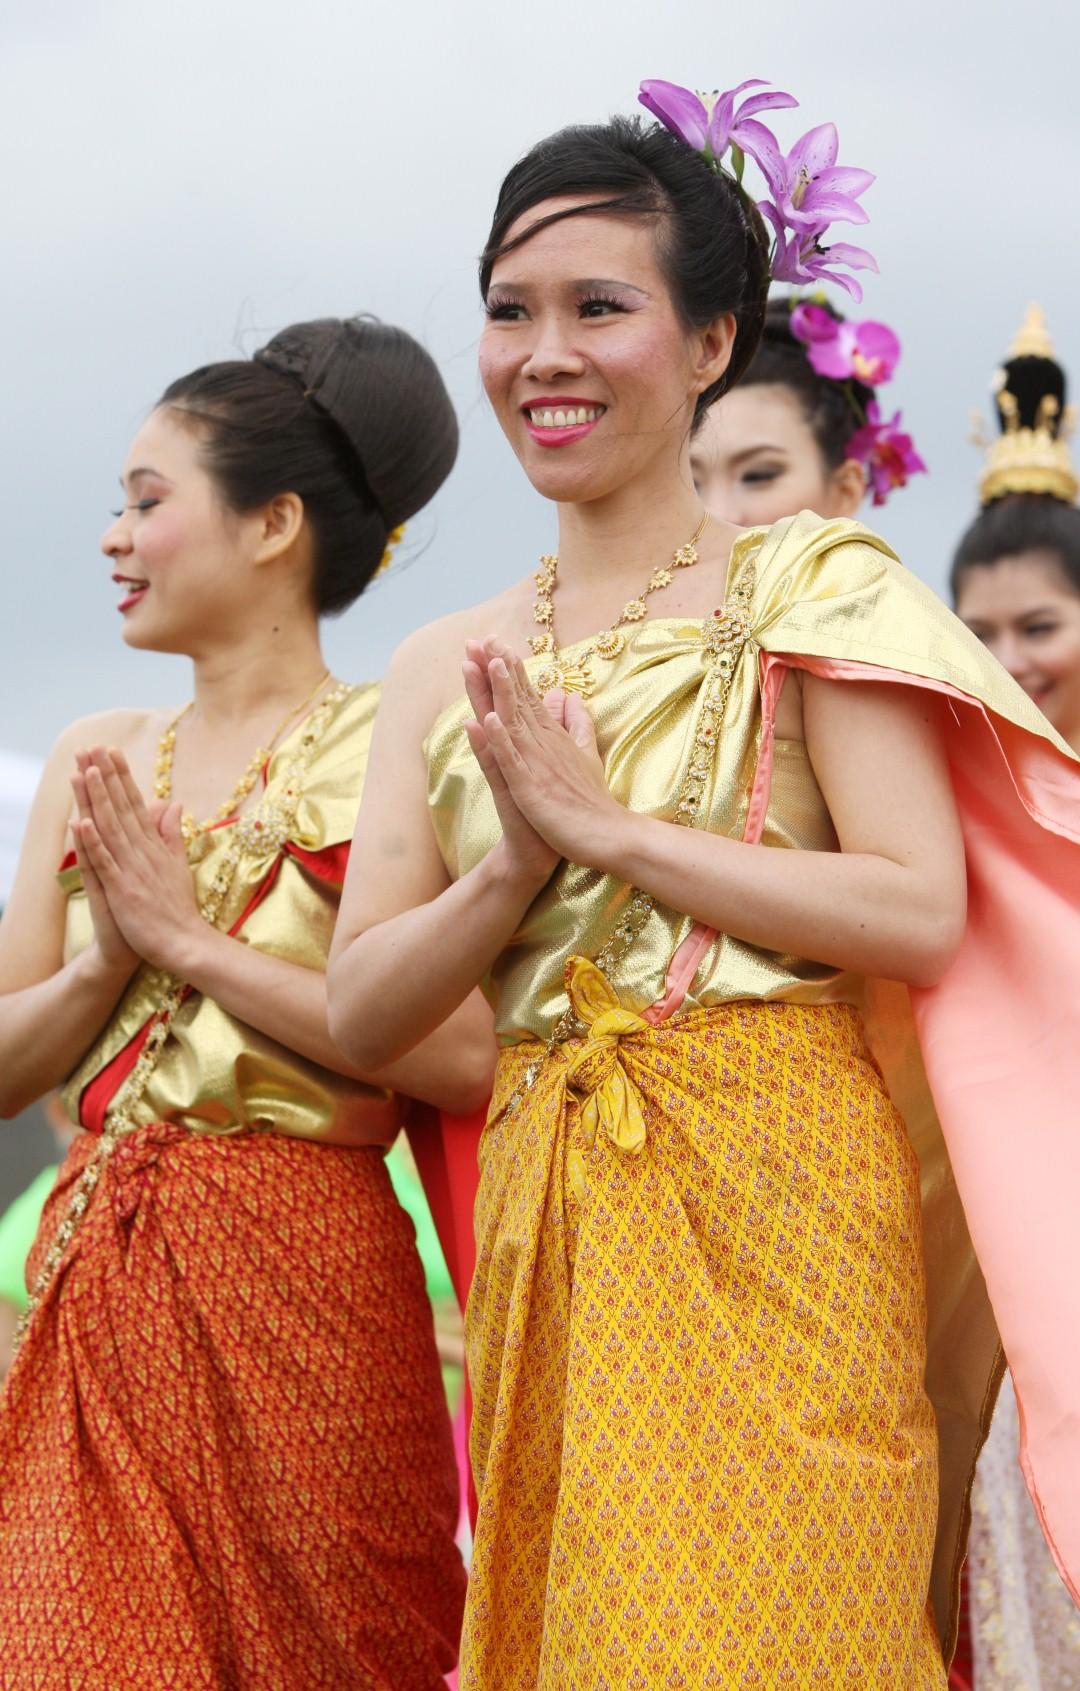 Weekend in Pictures June 30 - July 01. Southampton Thai Festival 2012.